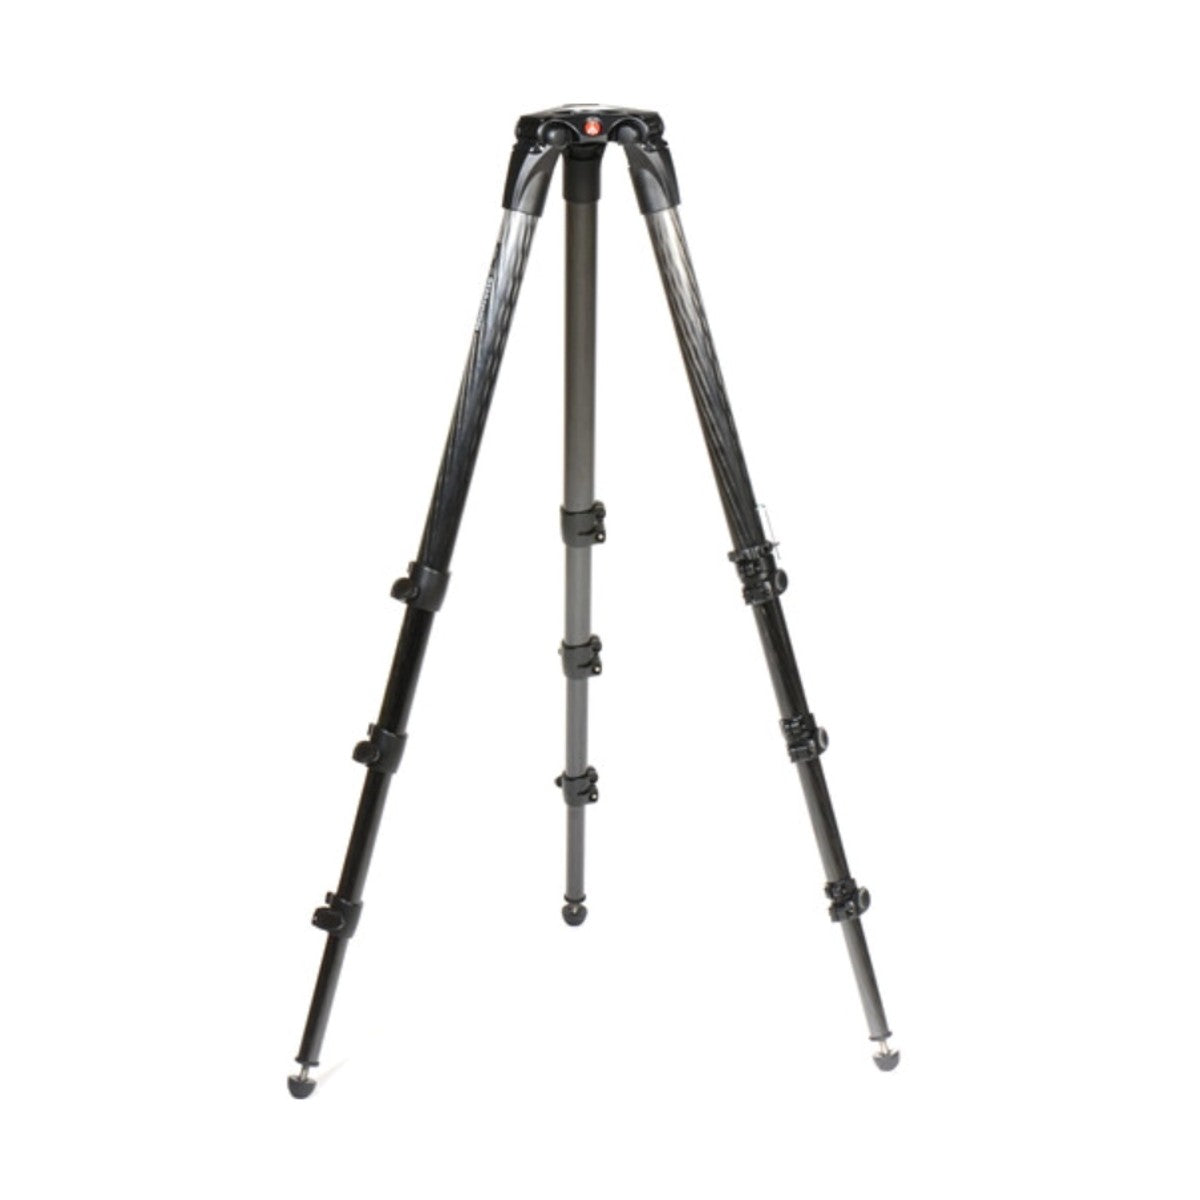 Manfrotto MVK612CTALLUS Video Kit with 612 Fluid Head and 536 Carbon Fiber Tripod